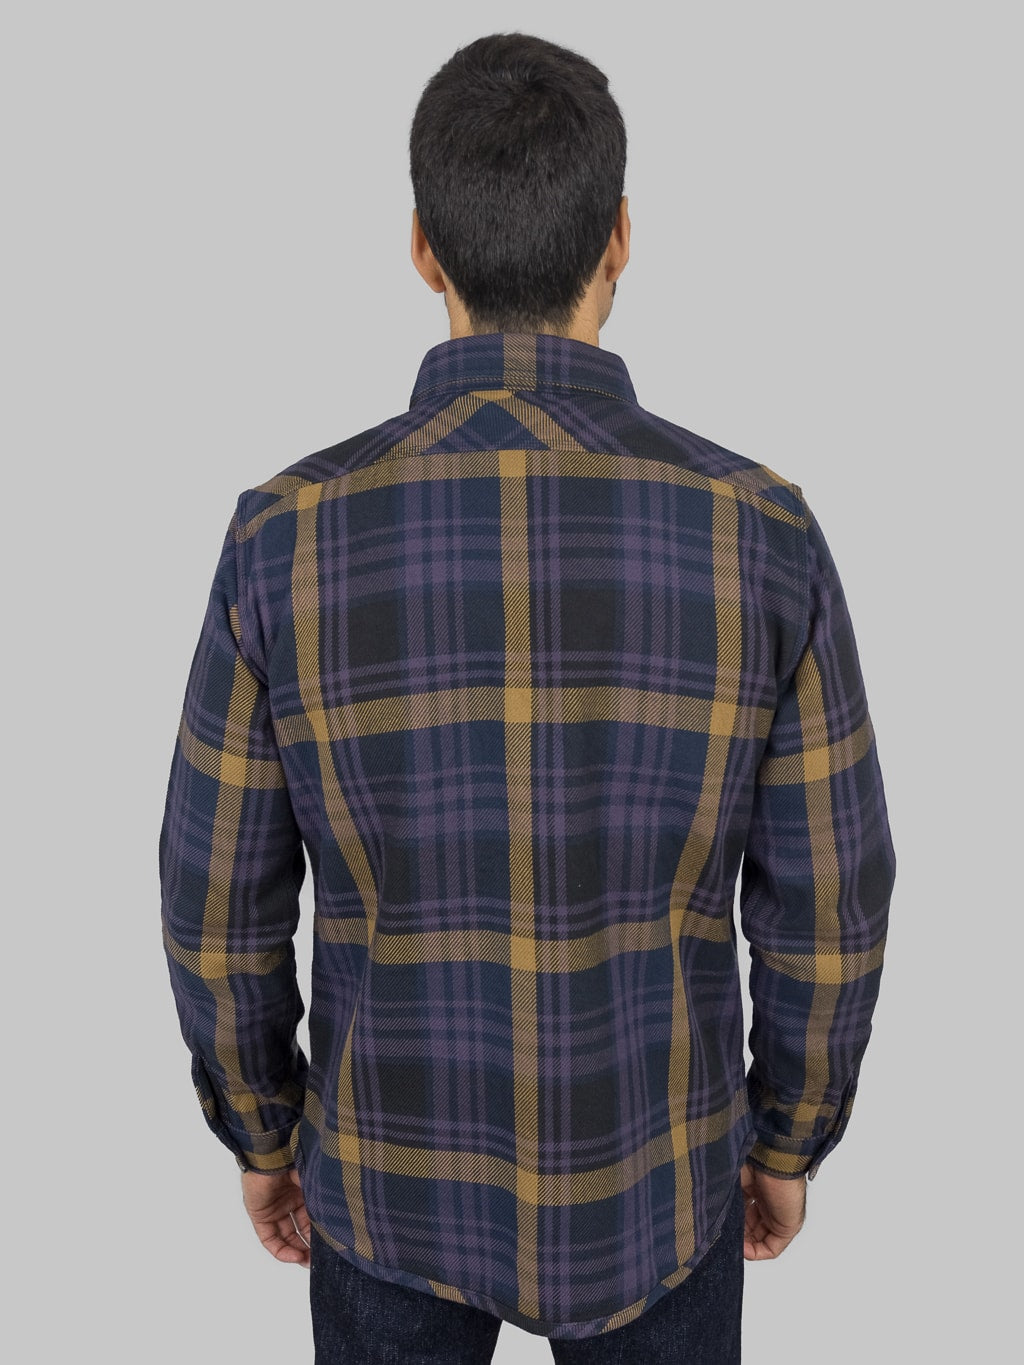 ues extra heavy selvedge flannel shirt navy model back fit